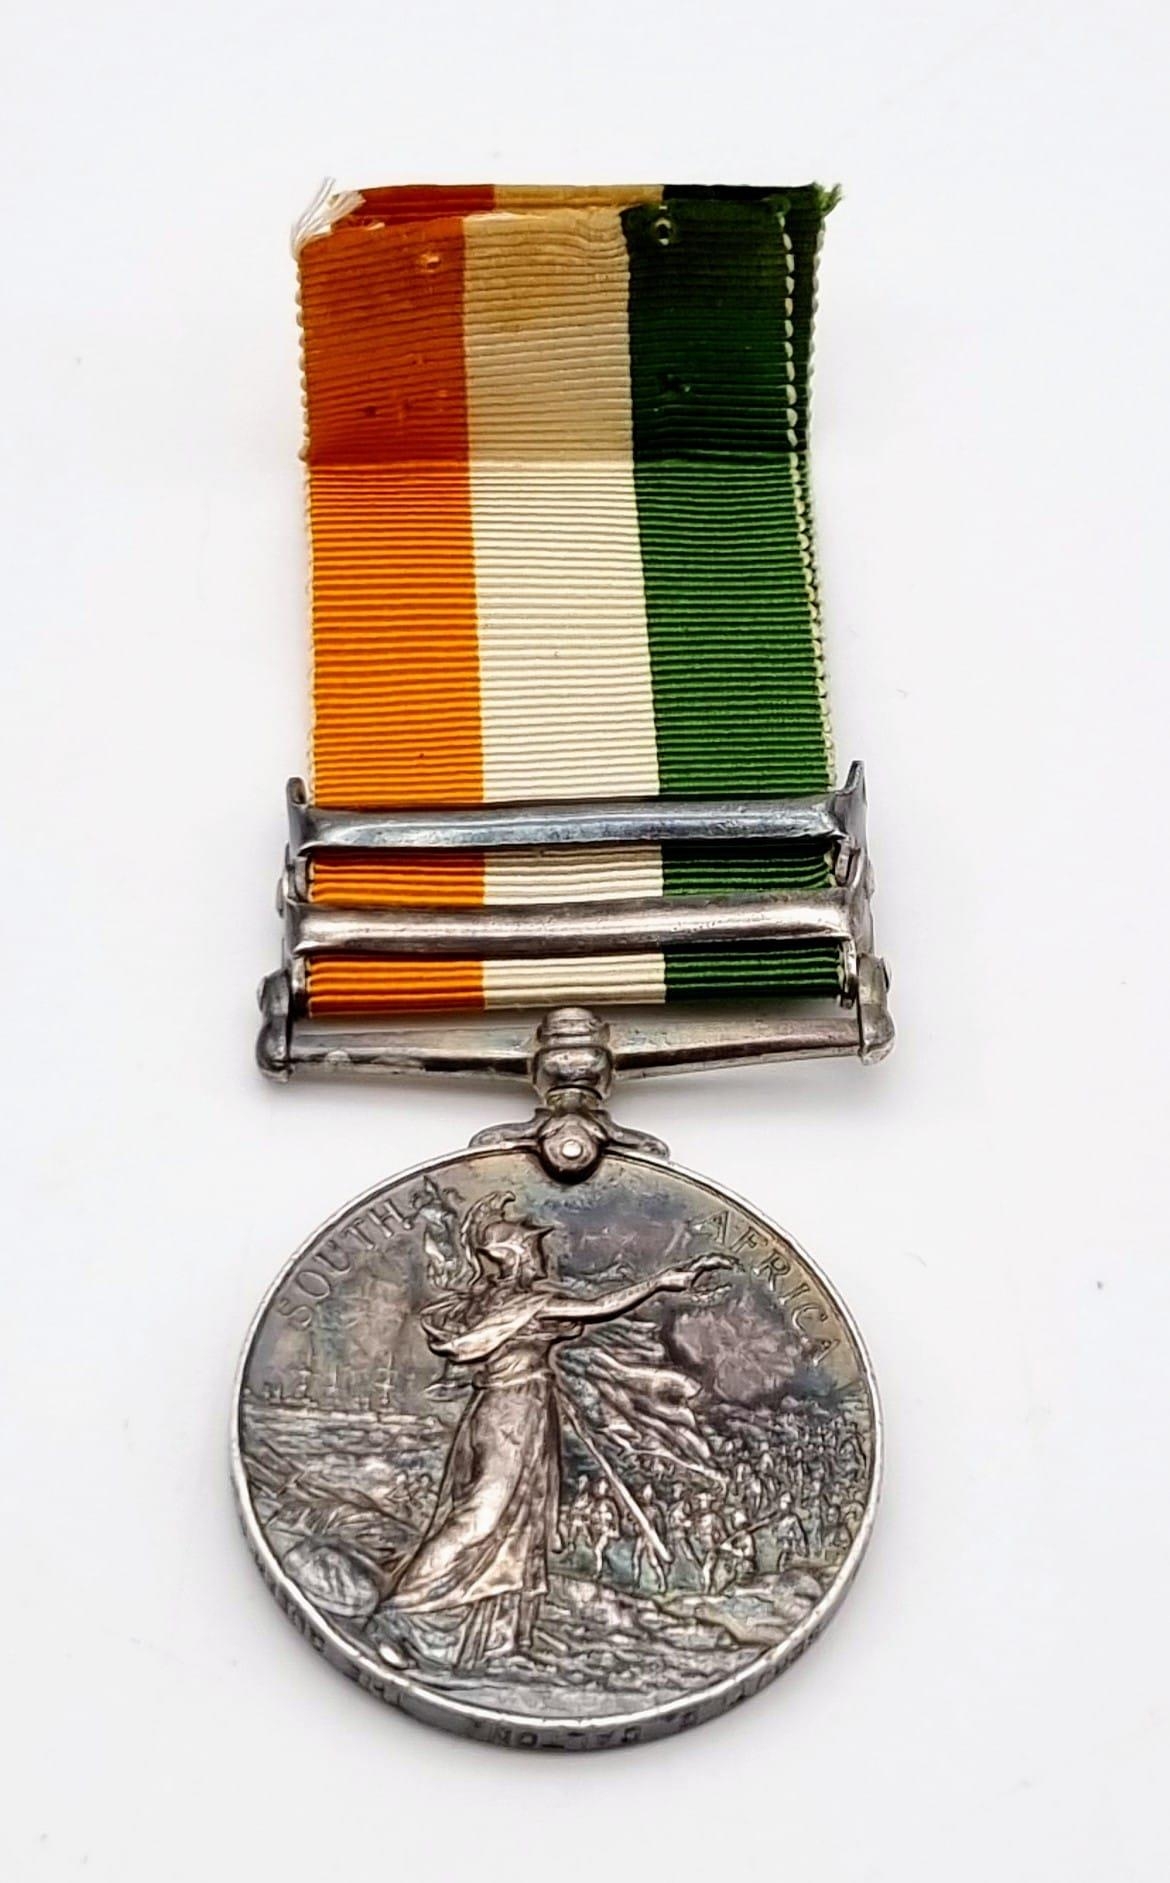 A King Edward VII Medal with Clasps South Africa1901 and South Africa 1902. Named to 5489 Sgt G. - Image 3 of 3